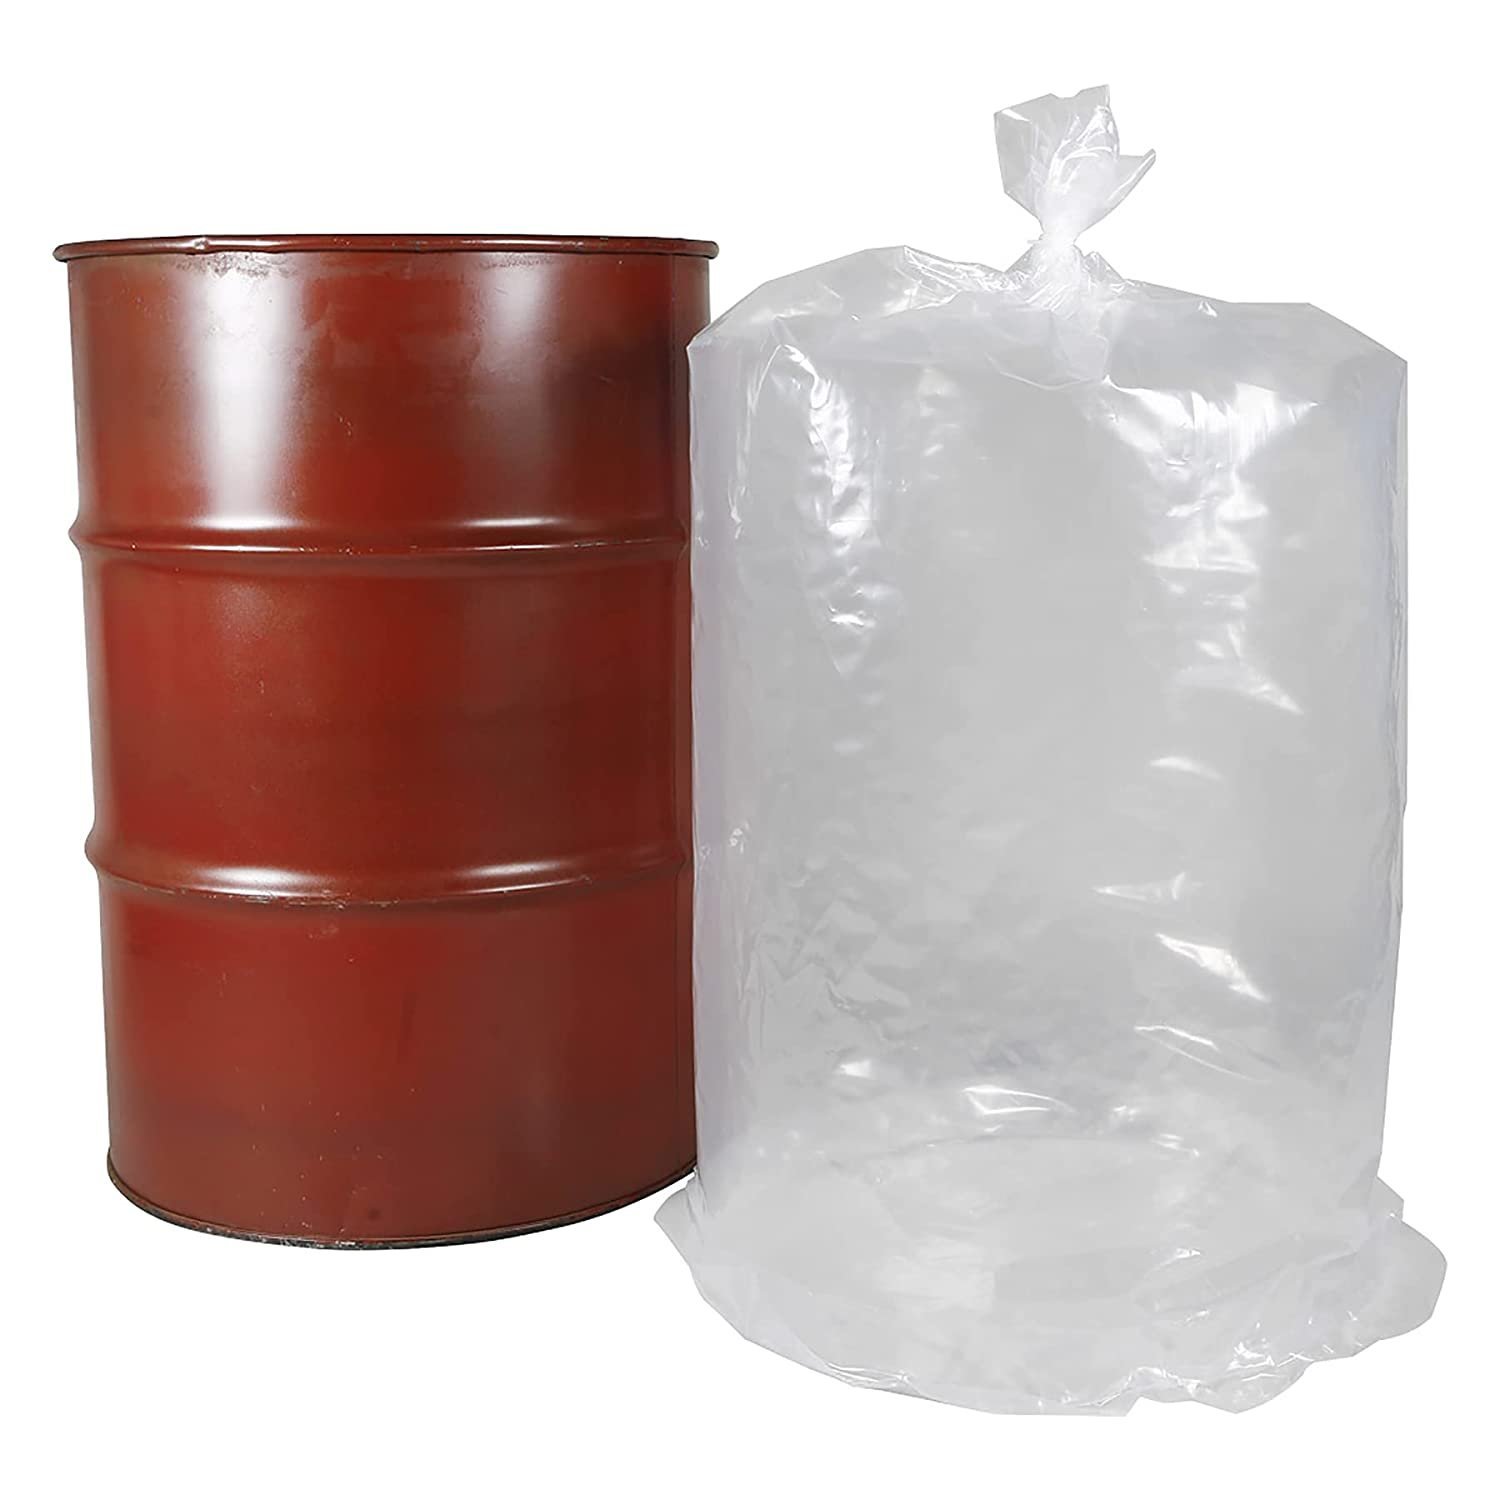 Primary image for Clear Drum Liners Round Bottom Low Density Plastic 4 Mil 5 to 55 Gallon